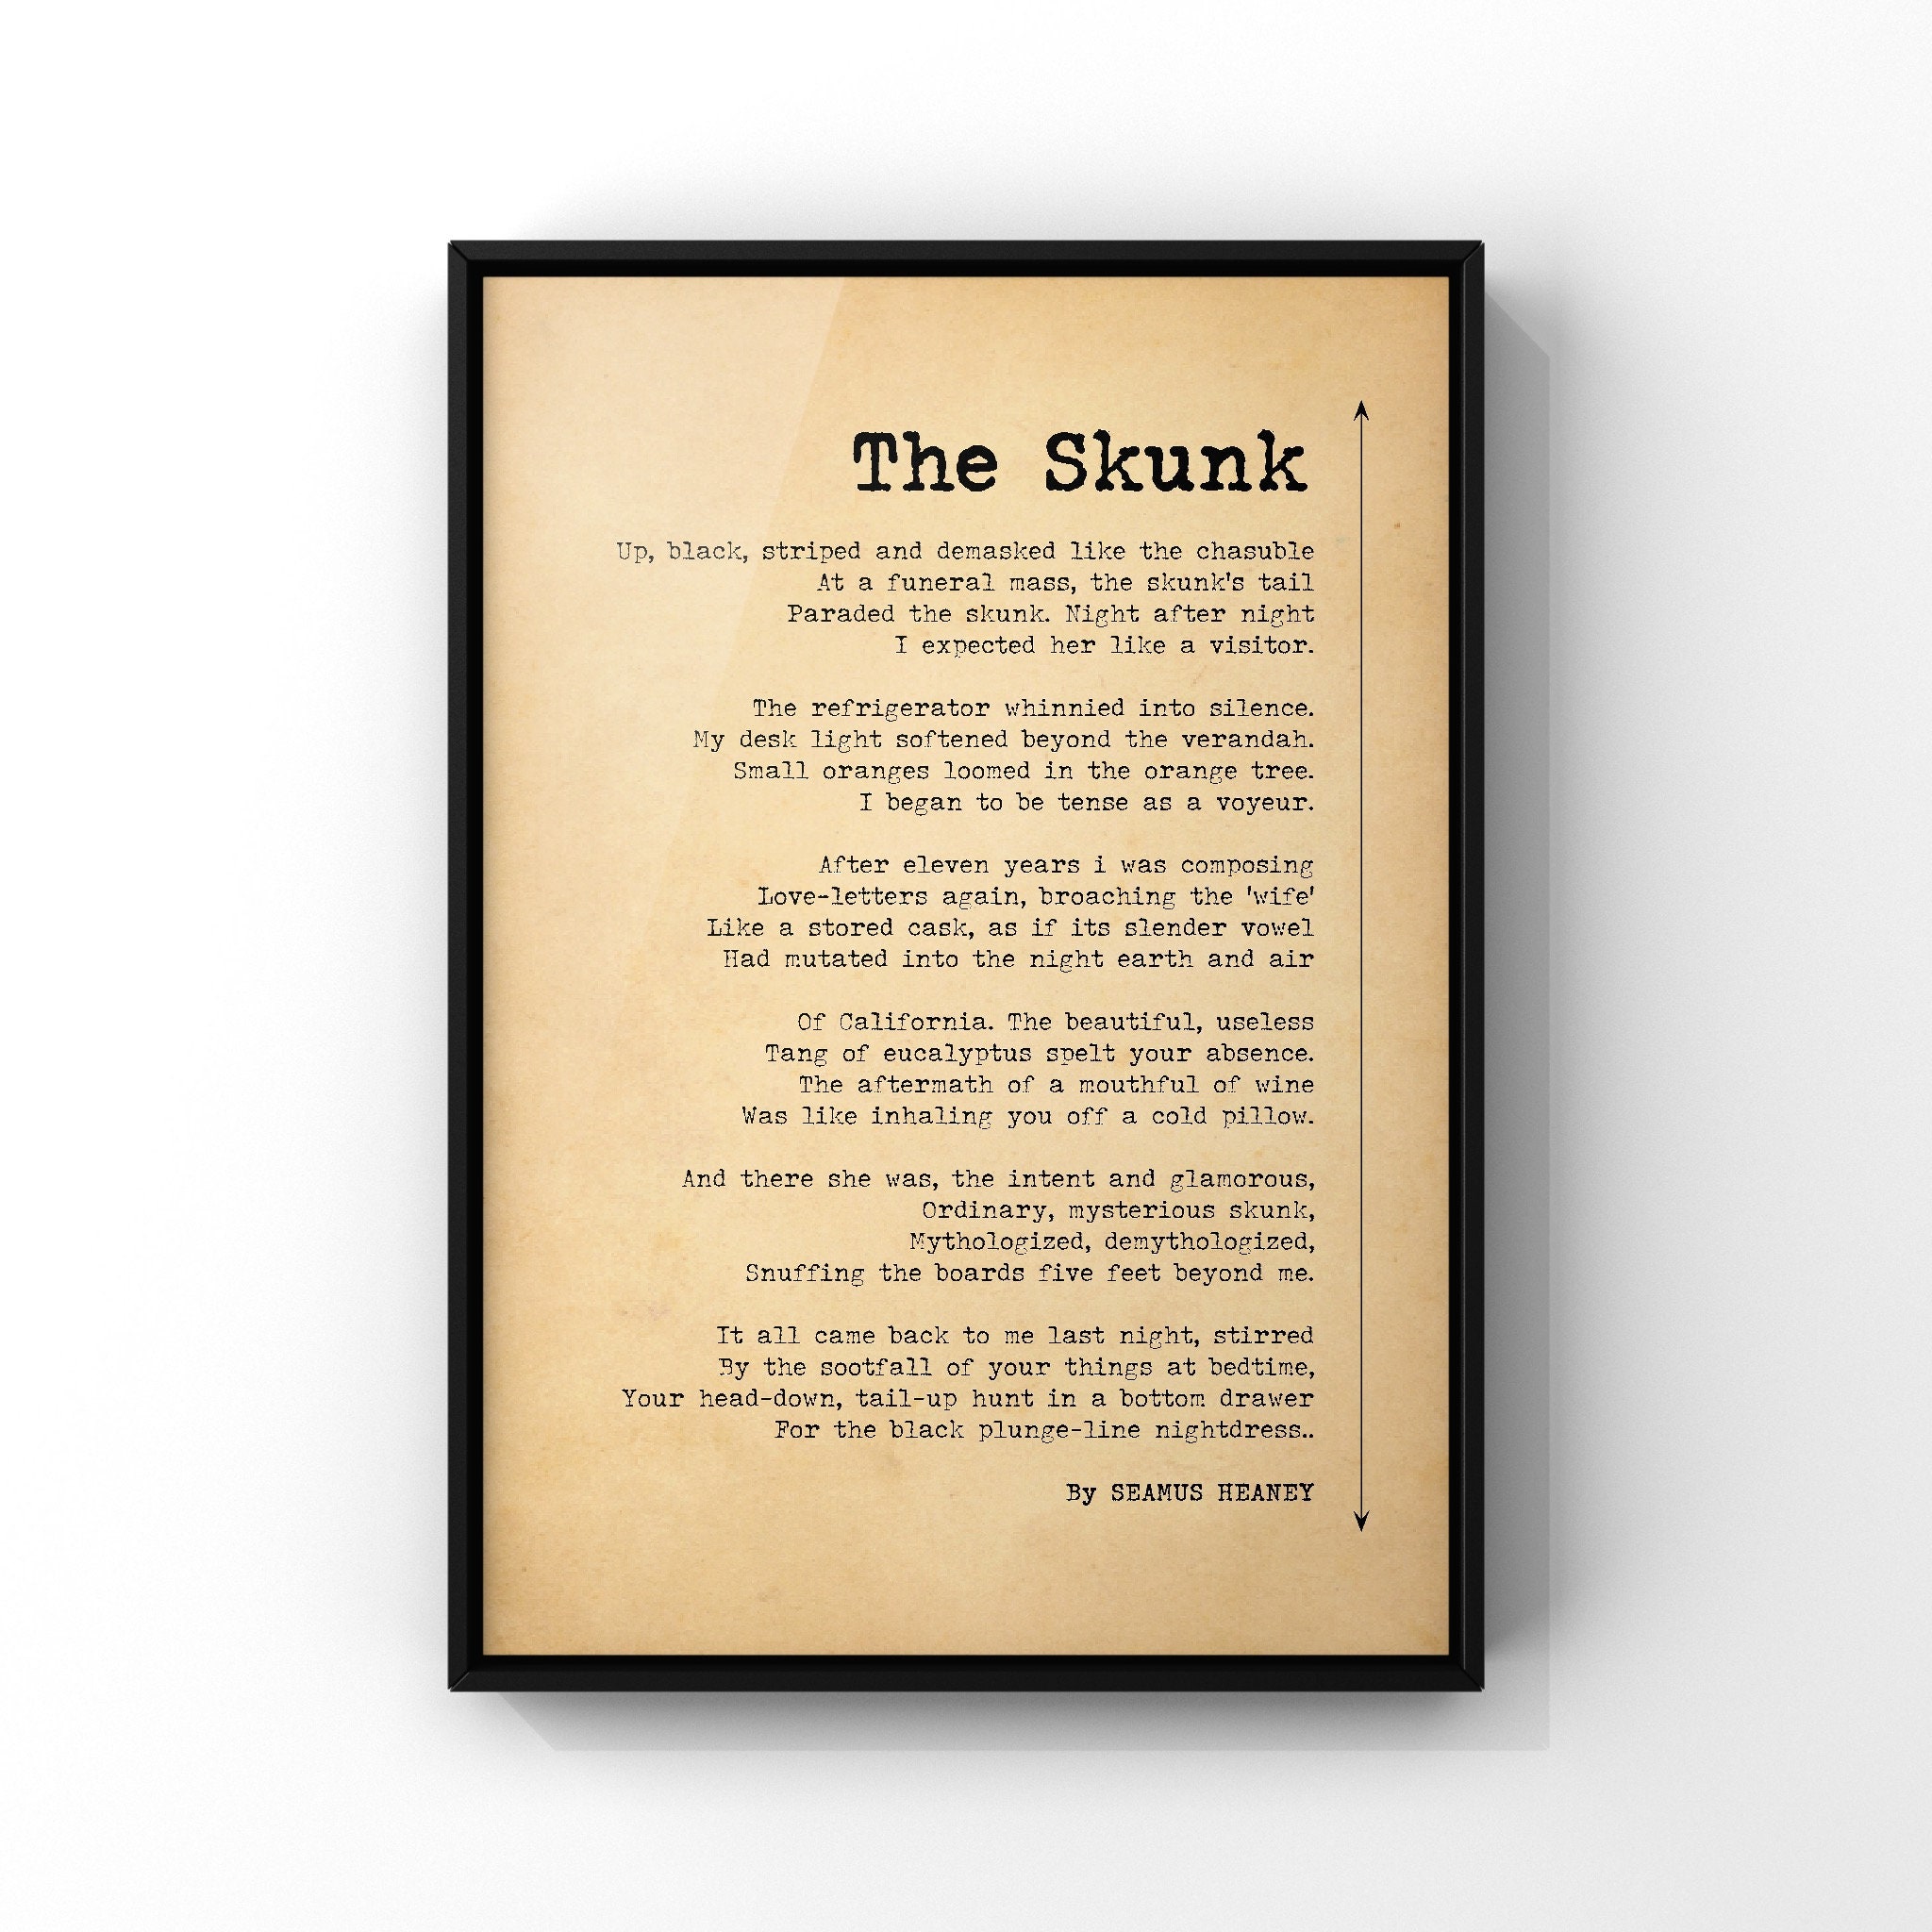 The Skunk Poem by Seamus Heaney Relationship Poem Poetry photo pic